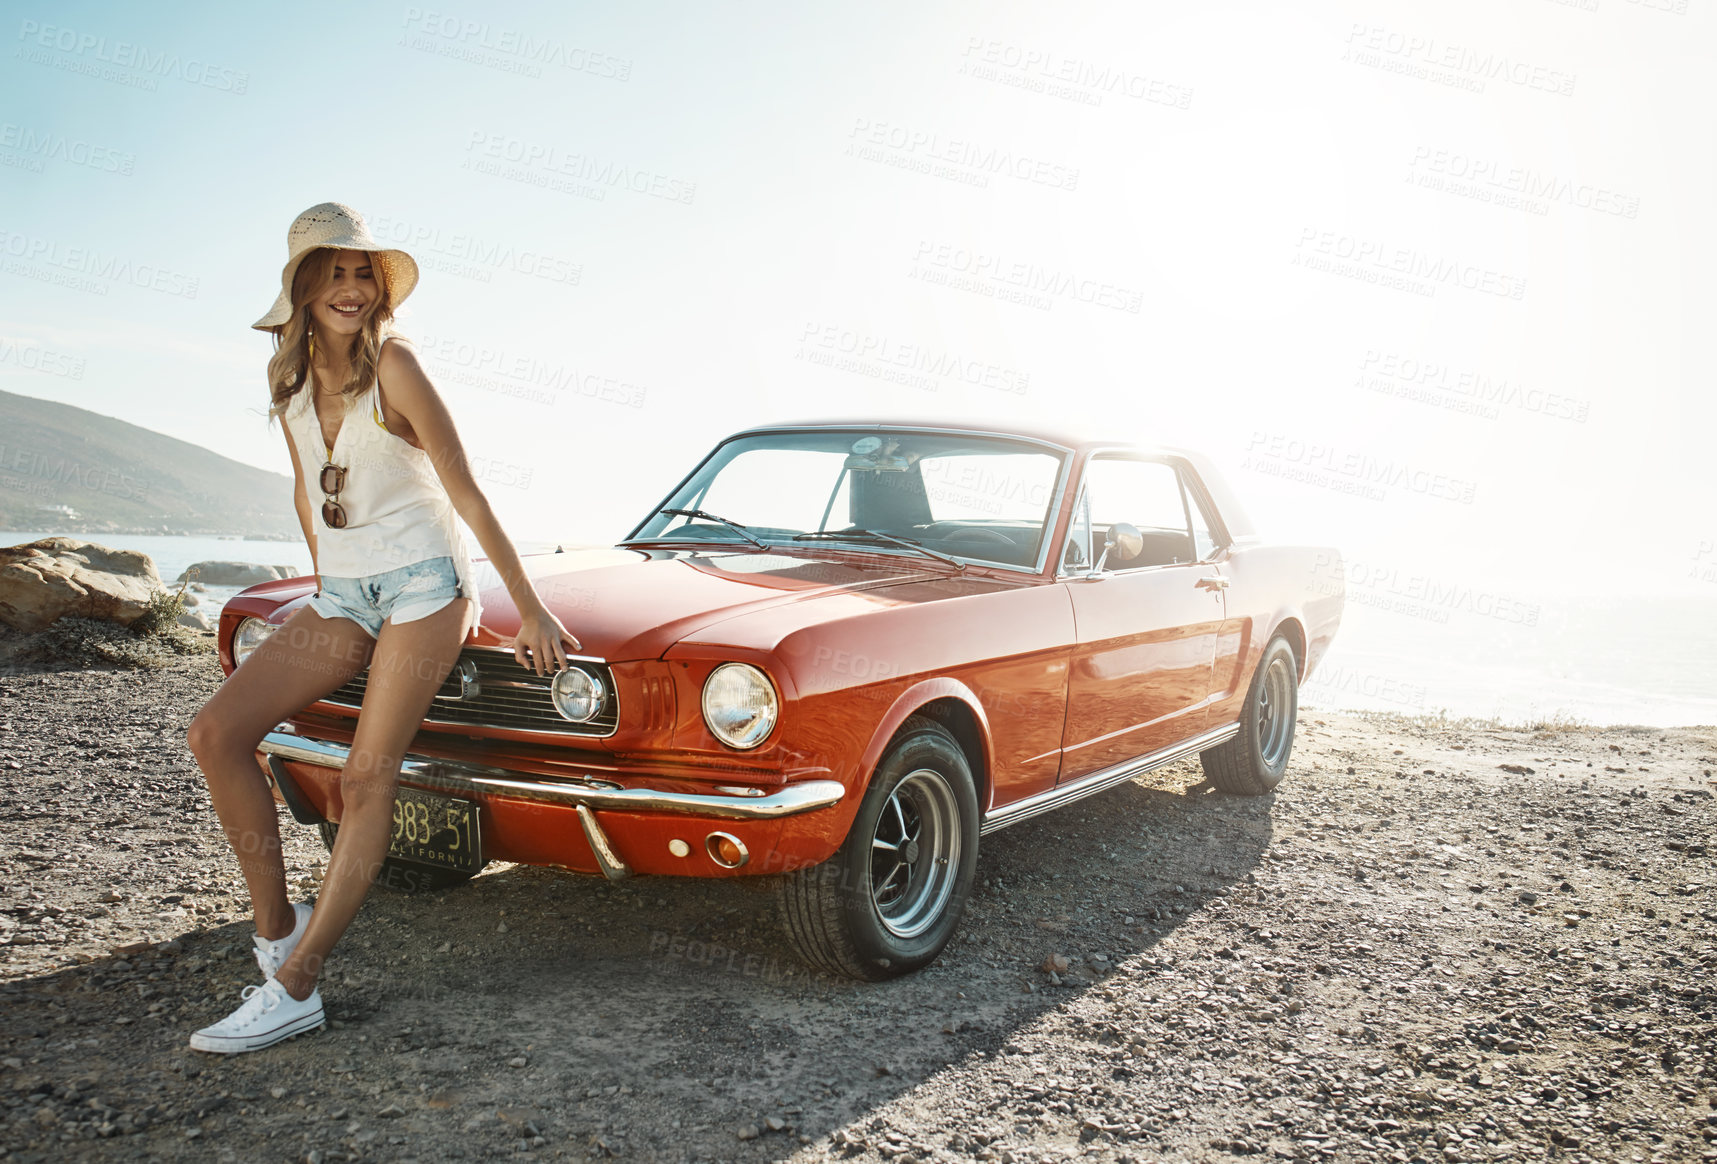 Buy stock photo Shot of an attractive young woman on a road trip